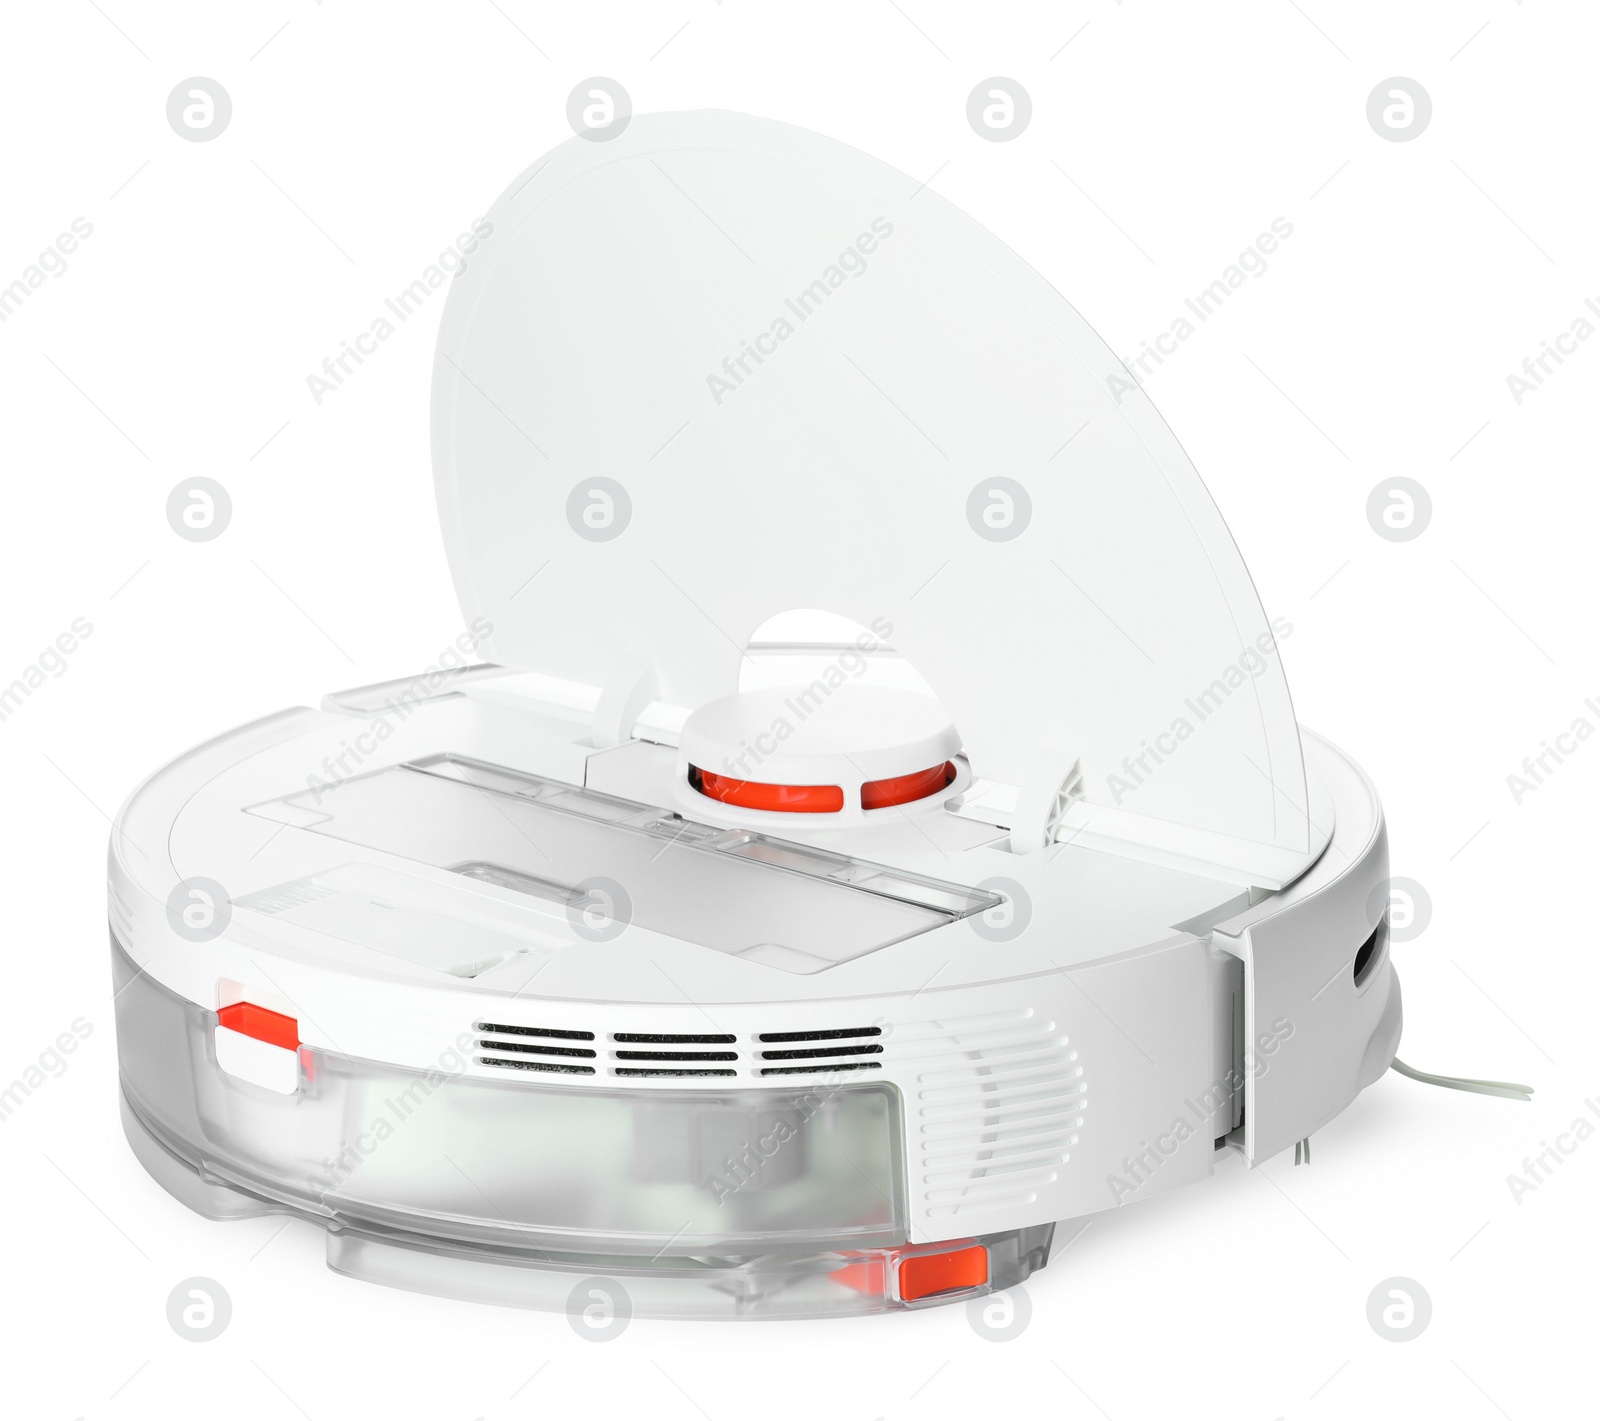 Photo of Open robotic vacuum cleaner isolated on white